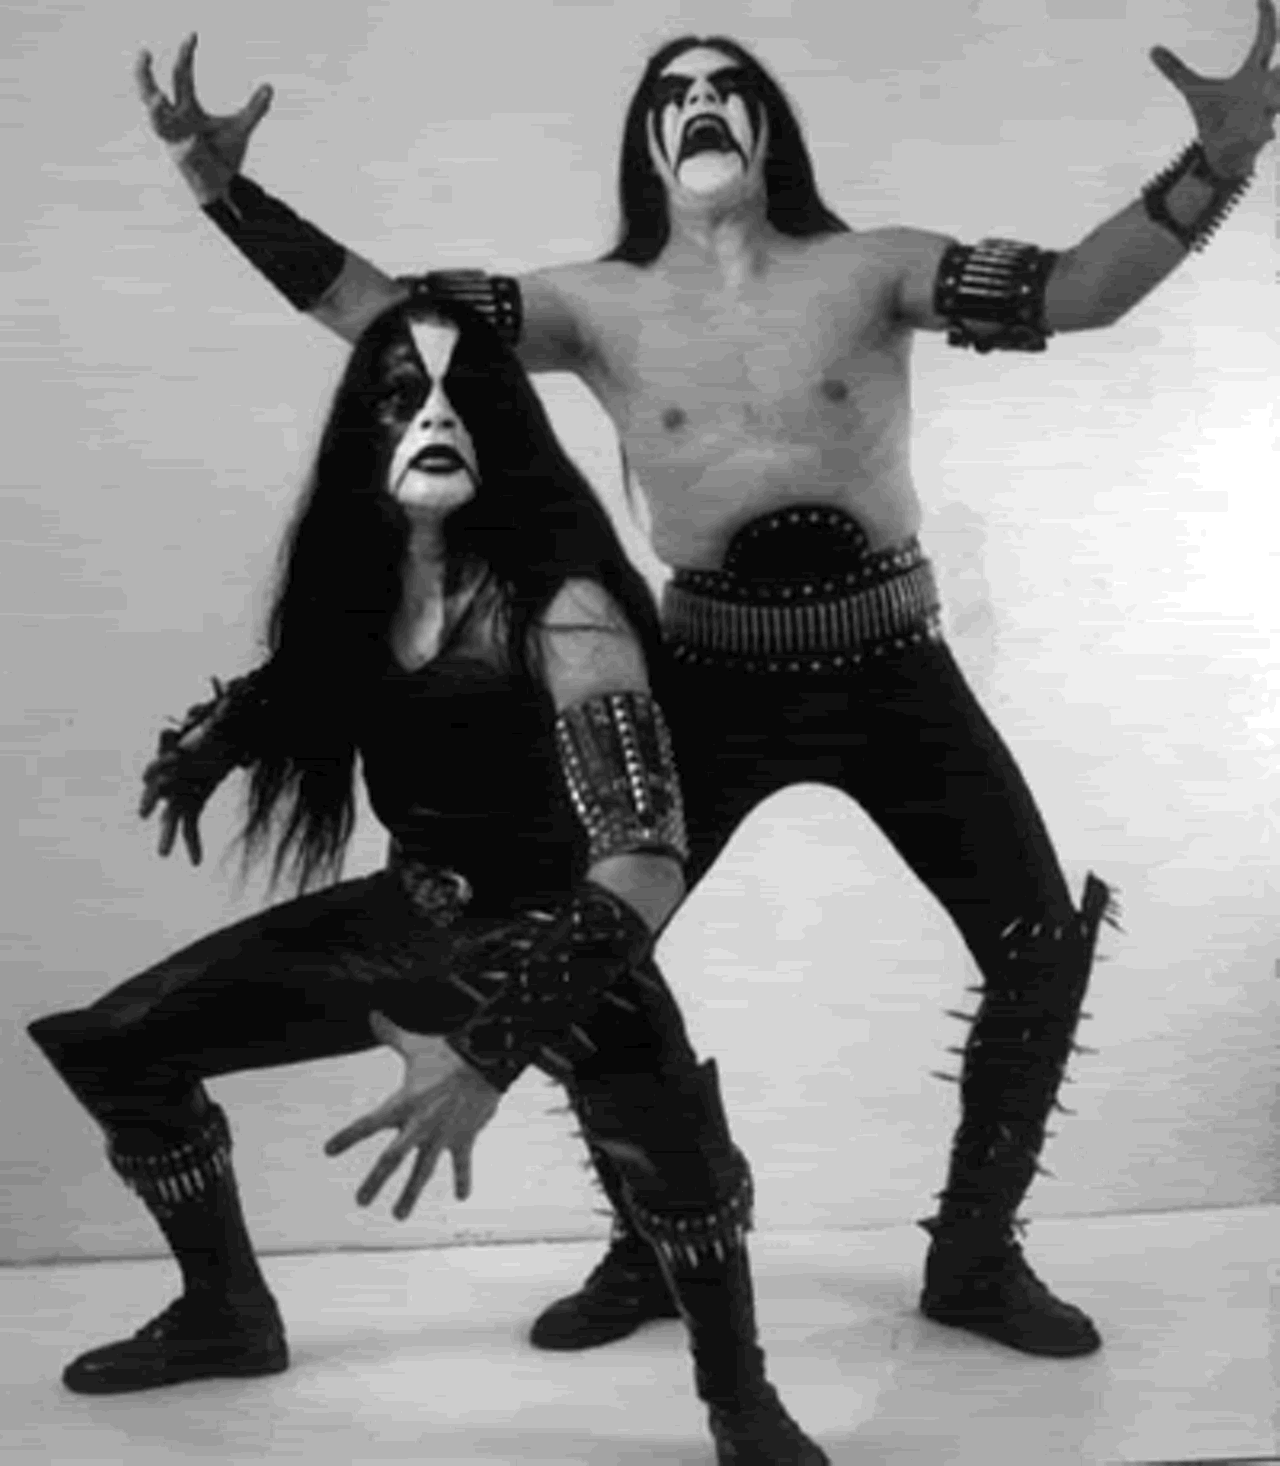 Immortal presents a complete package, combining heavy black corpse paint with poses that show they are ready for combat (or a massive bowel movement) at a moment's notice.